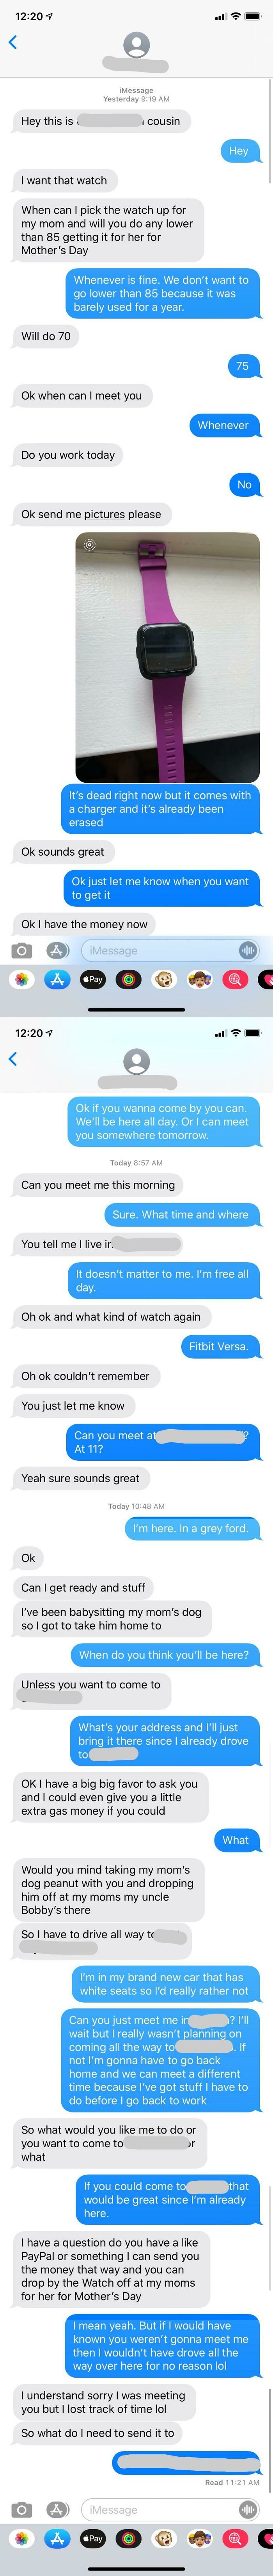 Thought You All Could Appreciate This. For Context, This Is My Husband’s Cousin Who Lives 40 Minutes Away. I Drove Over Halfway To Meet Her For Nothing. Not Pictured Is When She Repeatedly Asked Me If I Had Taken The Watch To Her Moms Yet.